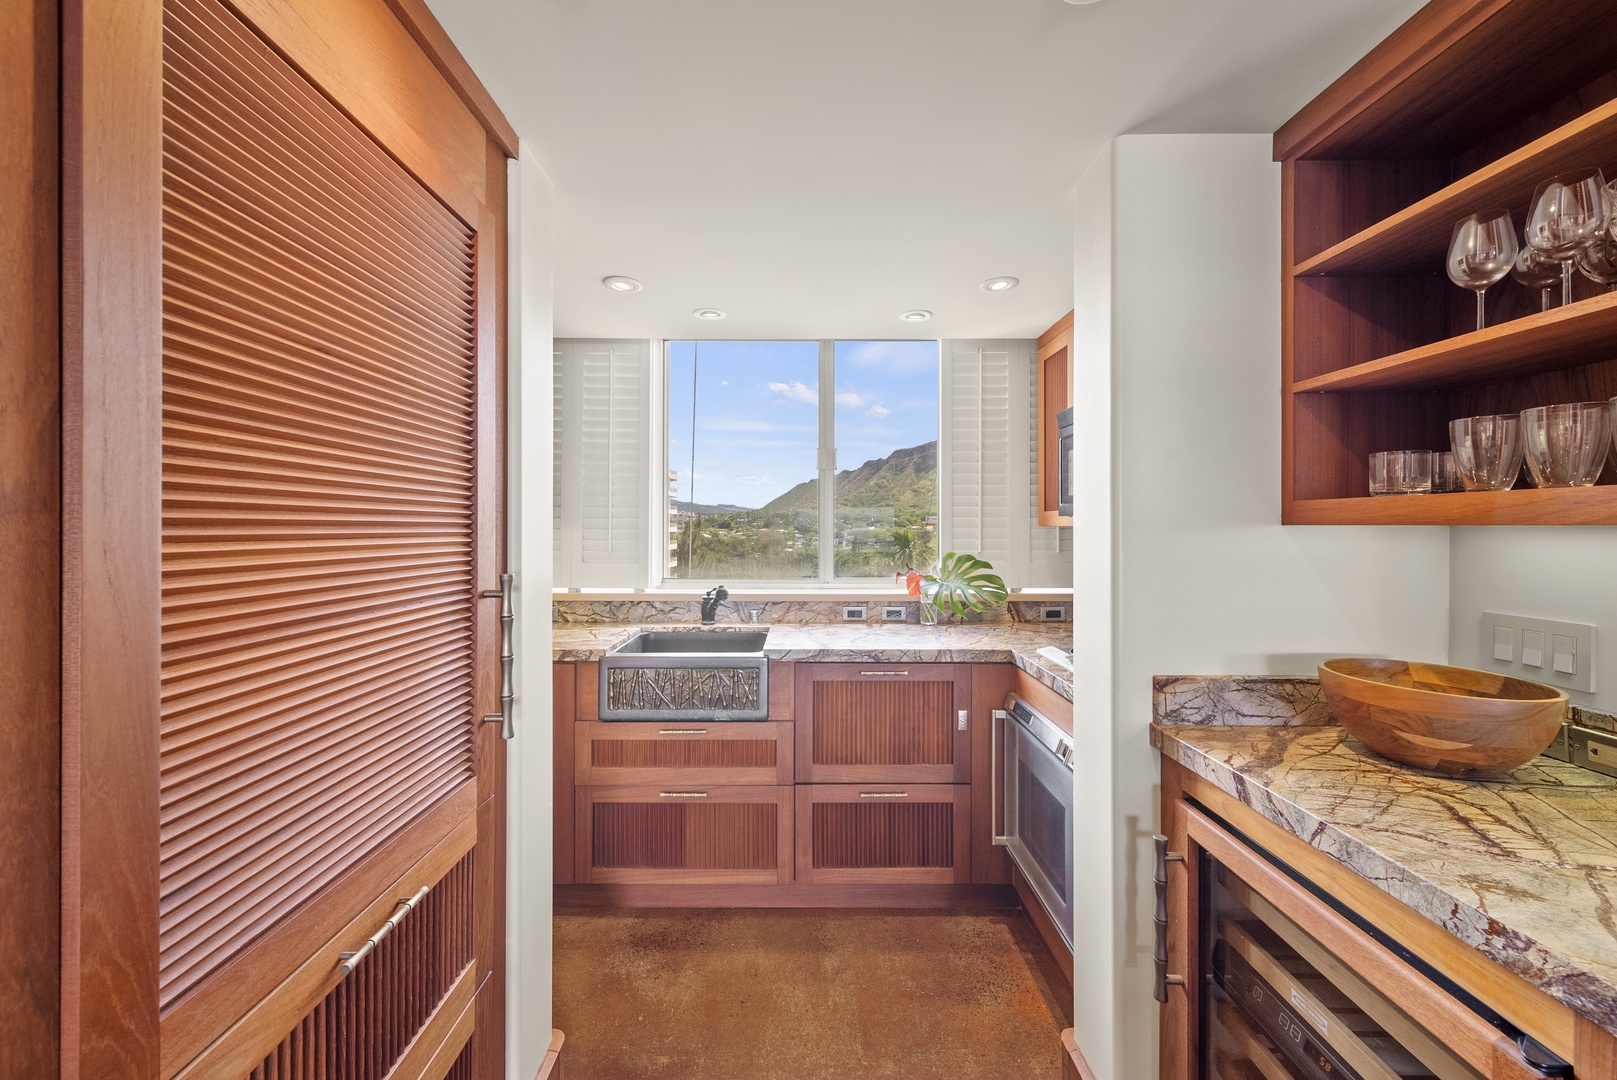 Honolulu Vacation Rentals, Diamond Head Sunset - Prepare your favorite island-inspired meals with views of the city and mountain range